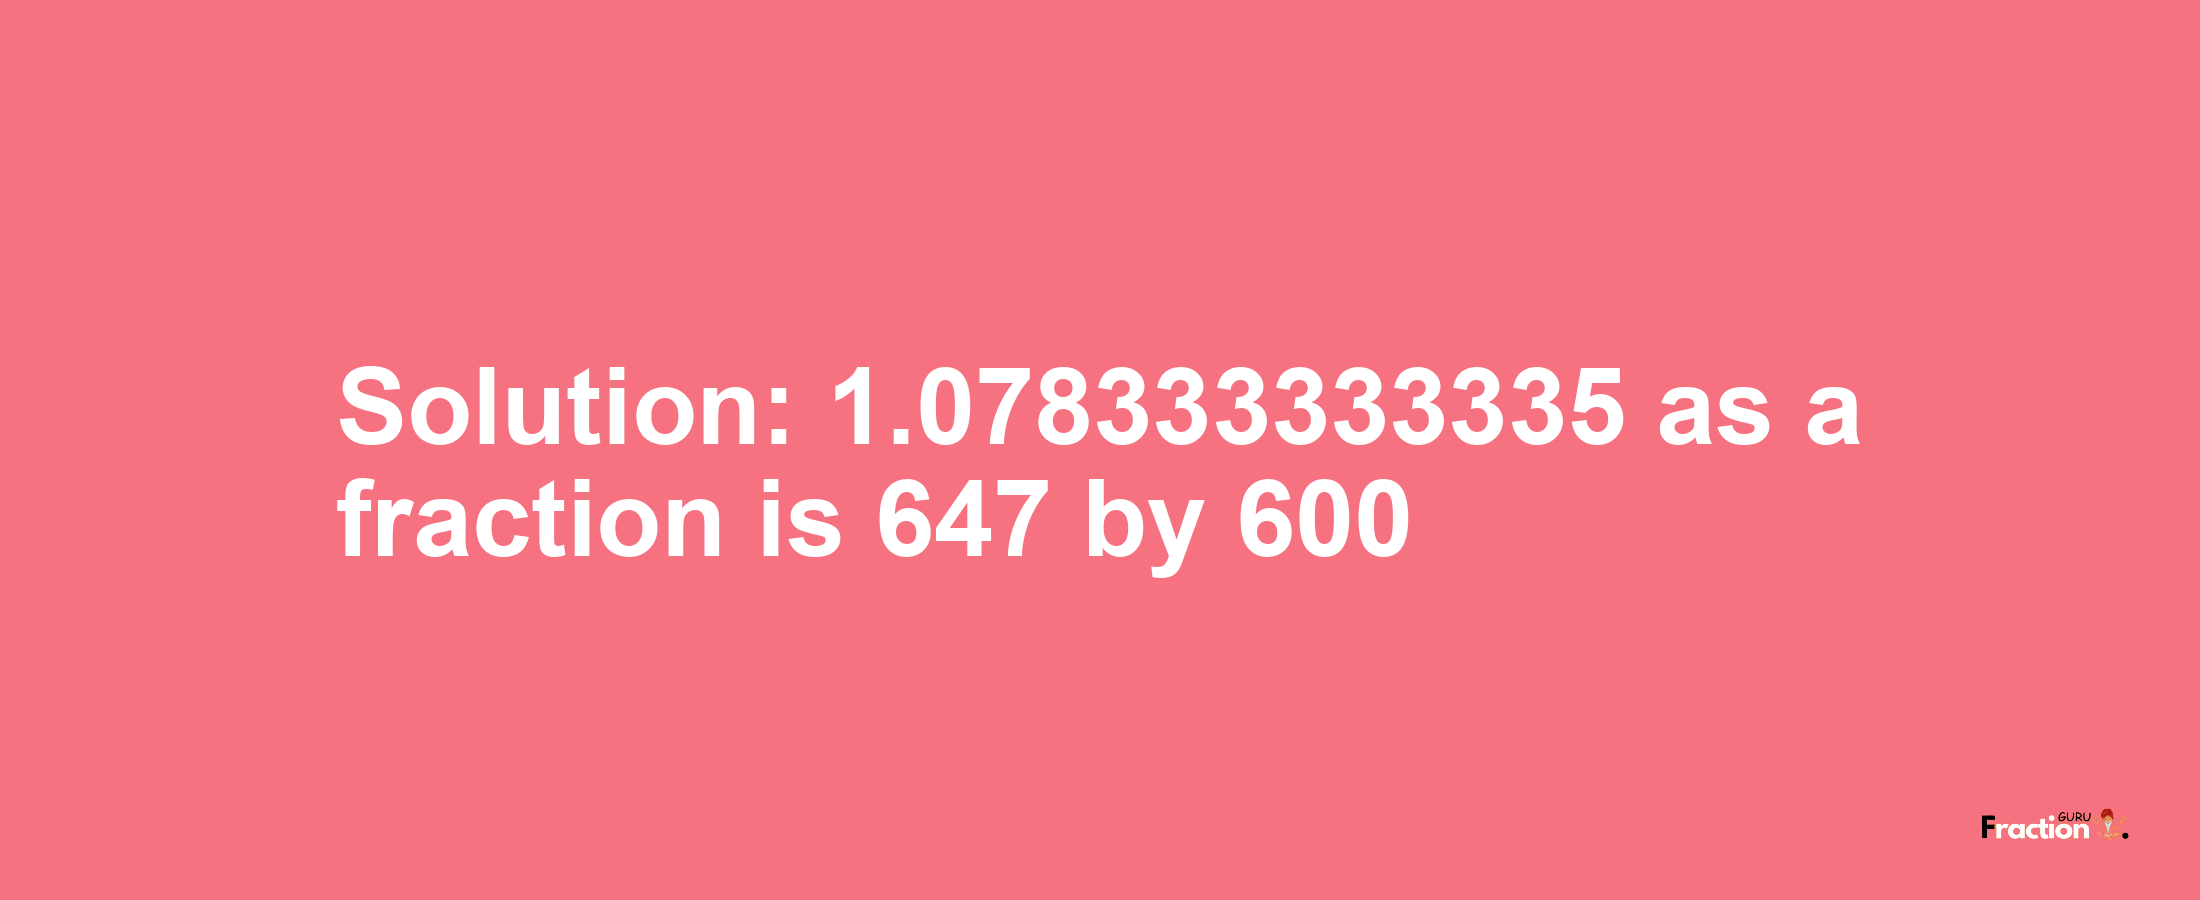 Solution:1.078333333335 as a fraction is 647/600